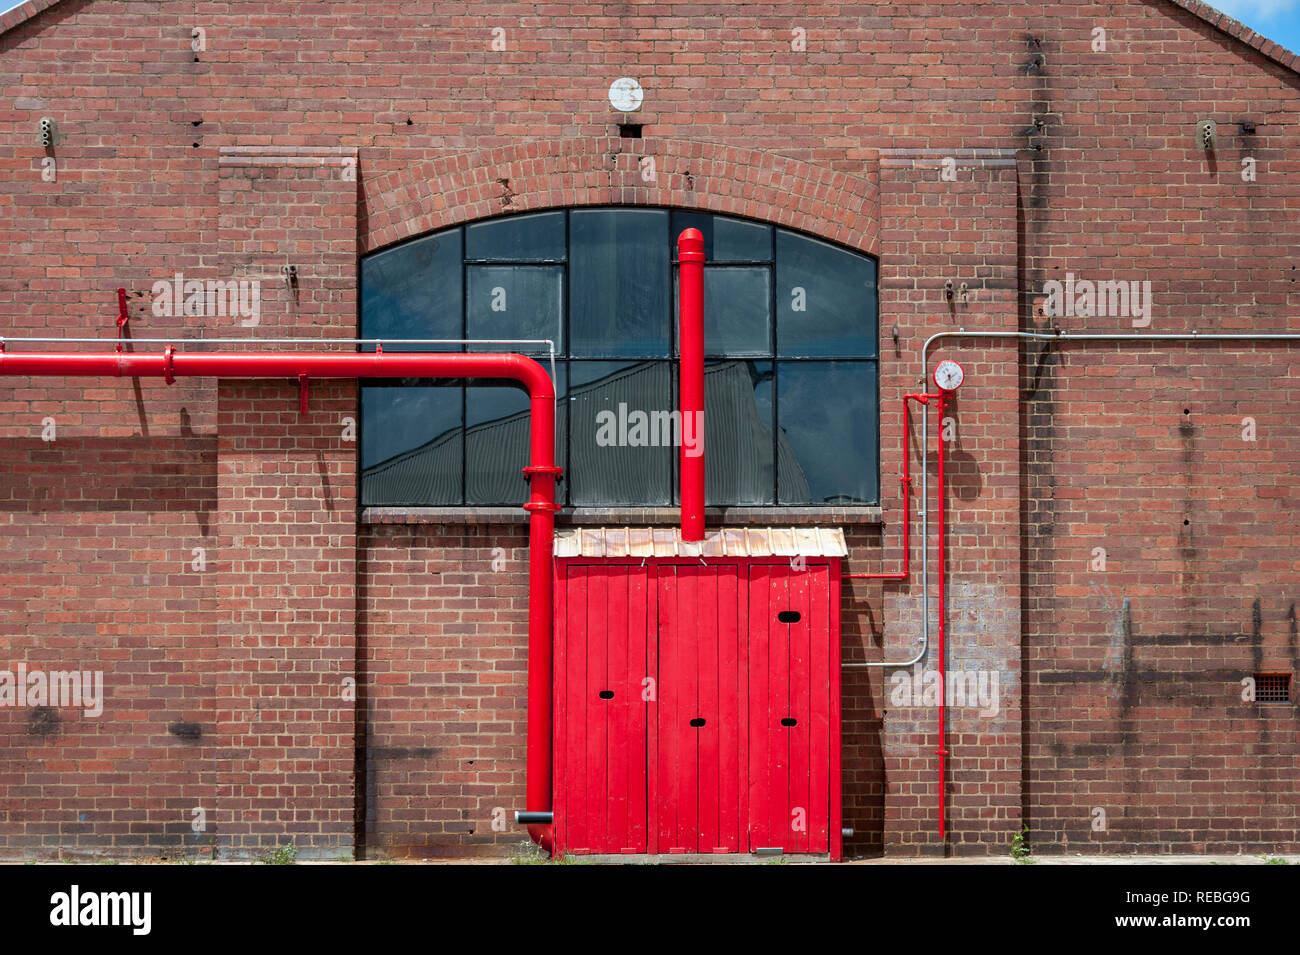 A red control box and red pipes against a brick building with arched windows Stock Photo